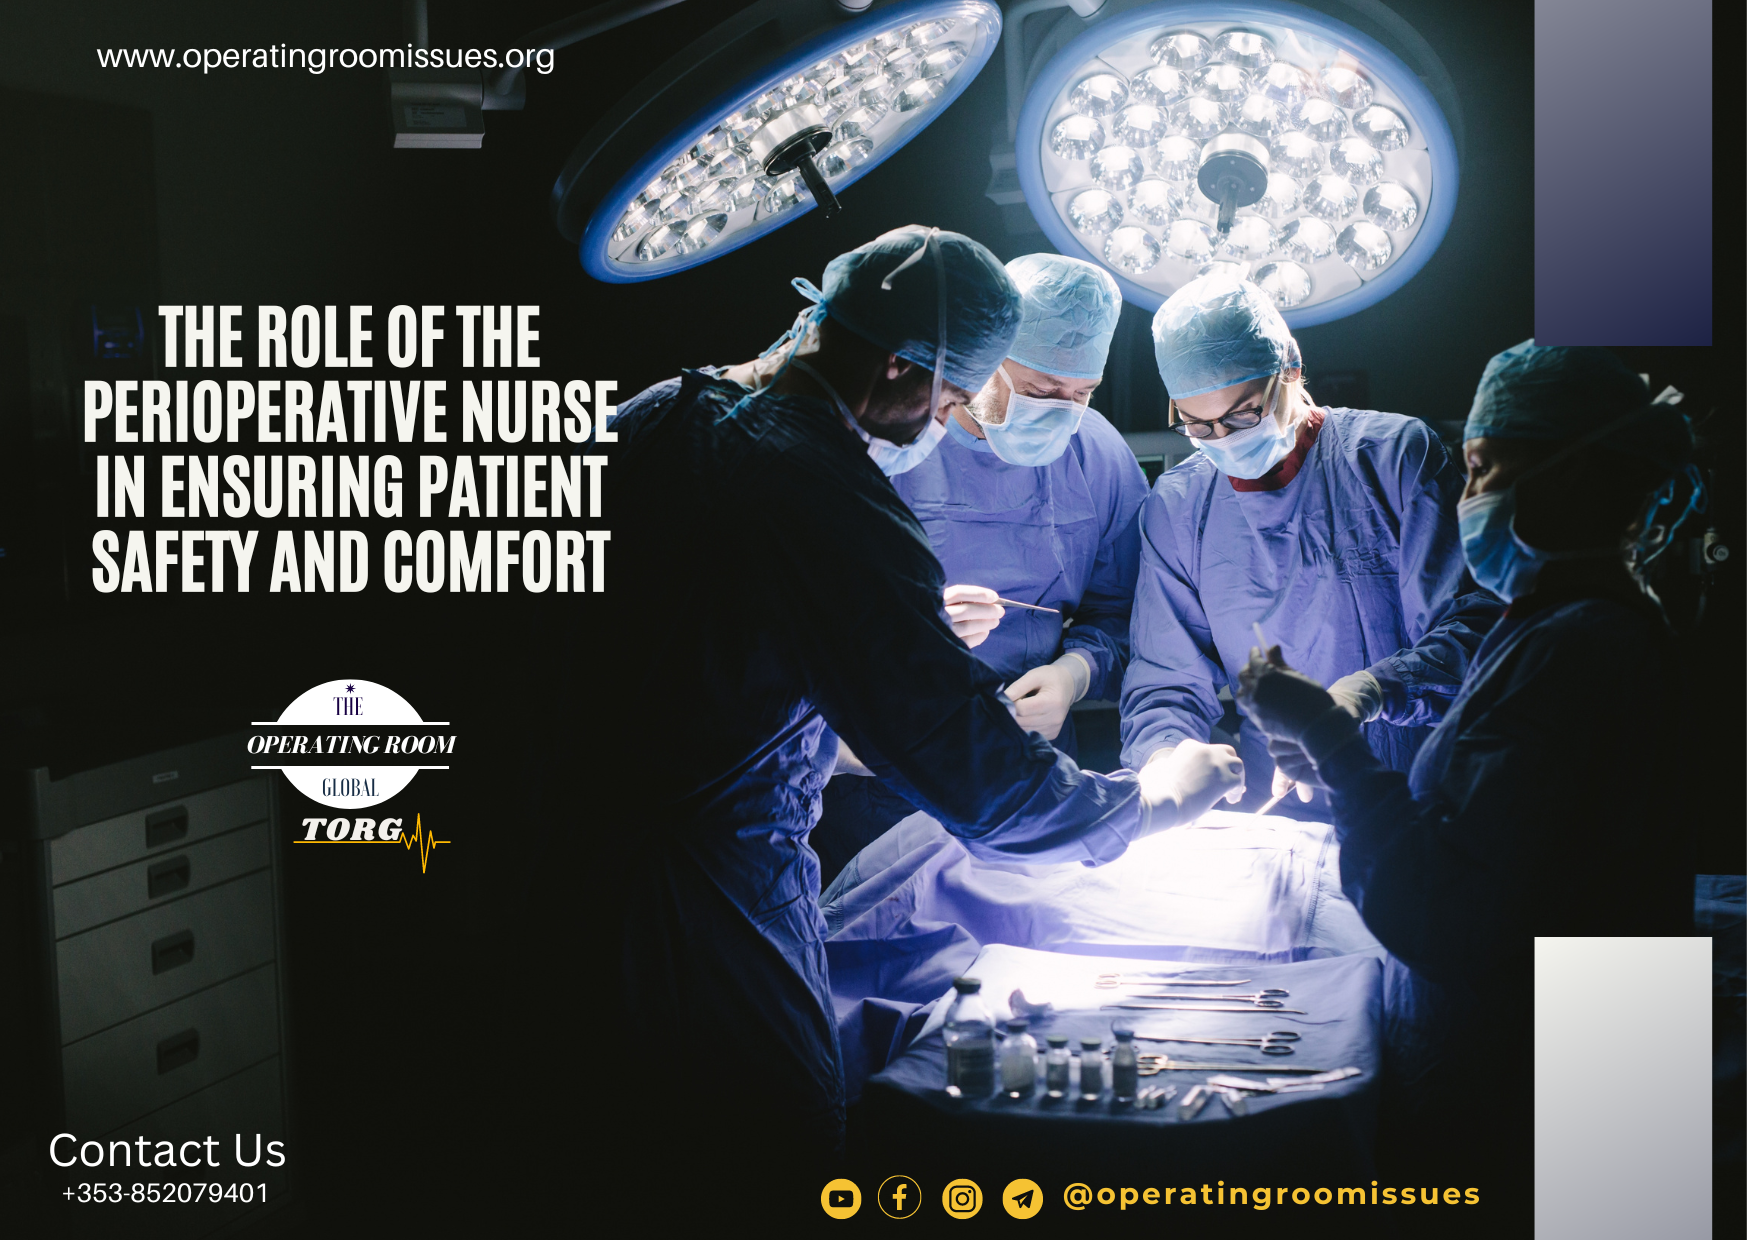 <strong>The role of the perioperative nurse in ensuring patient safety and comfort</strong>